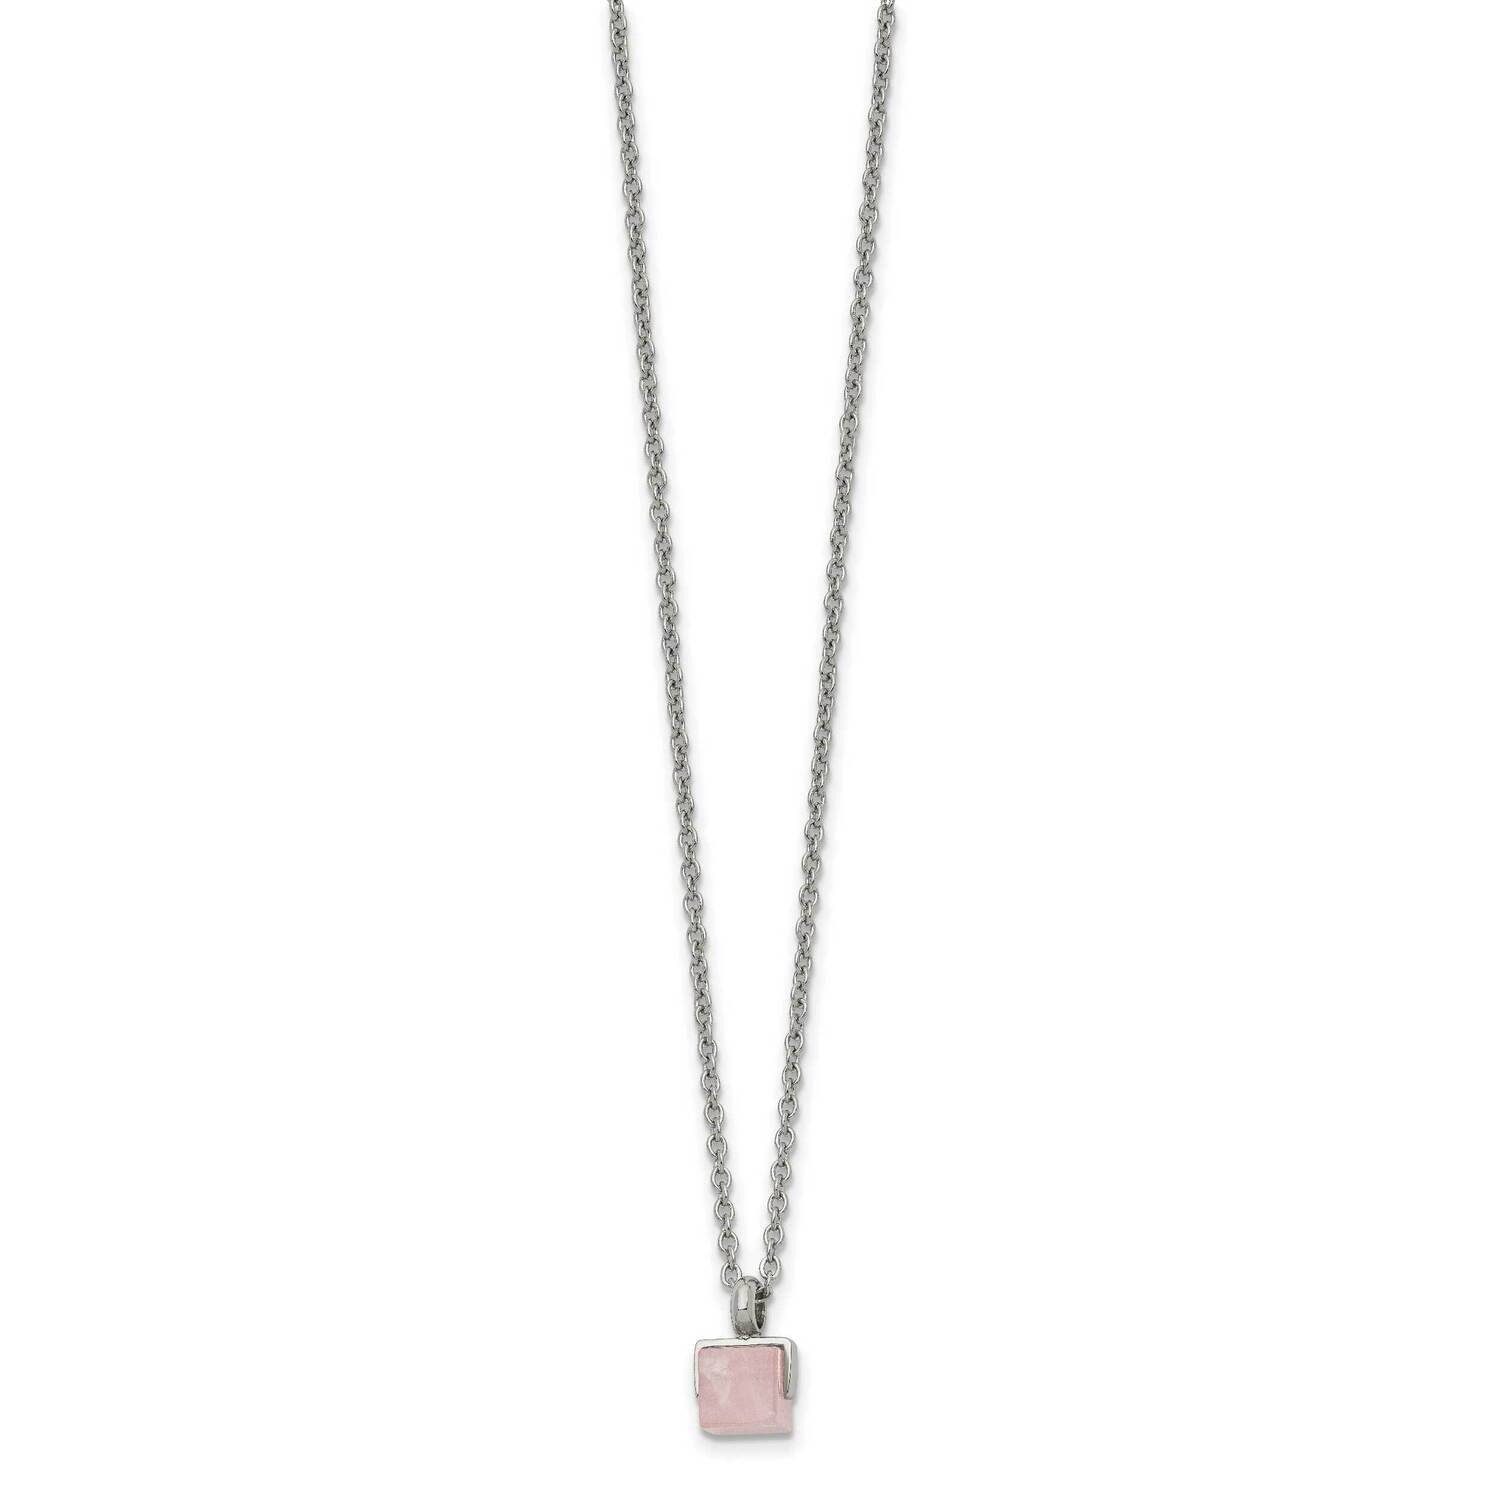 Rose Quartz Square 16 Inch 2 Inch Ext. Necklace Stainless Steel Polished SRN2752-16